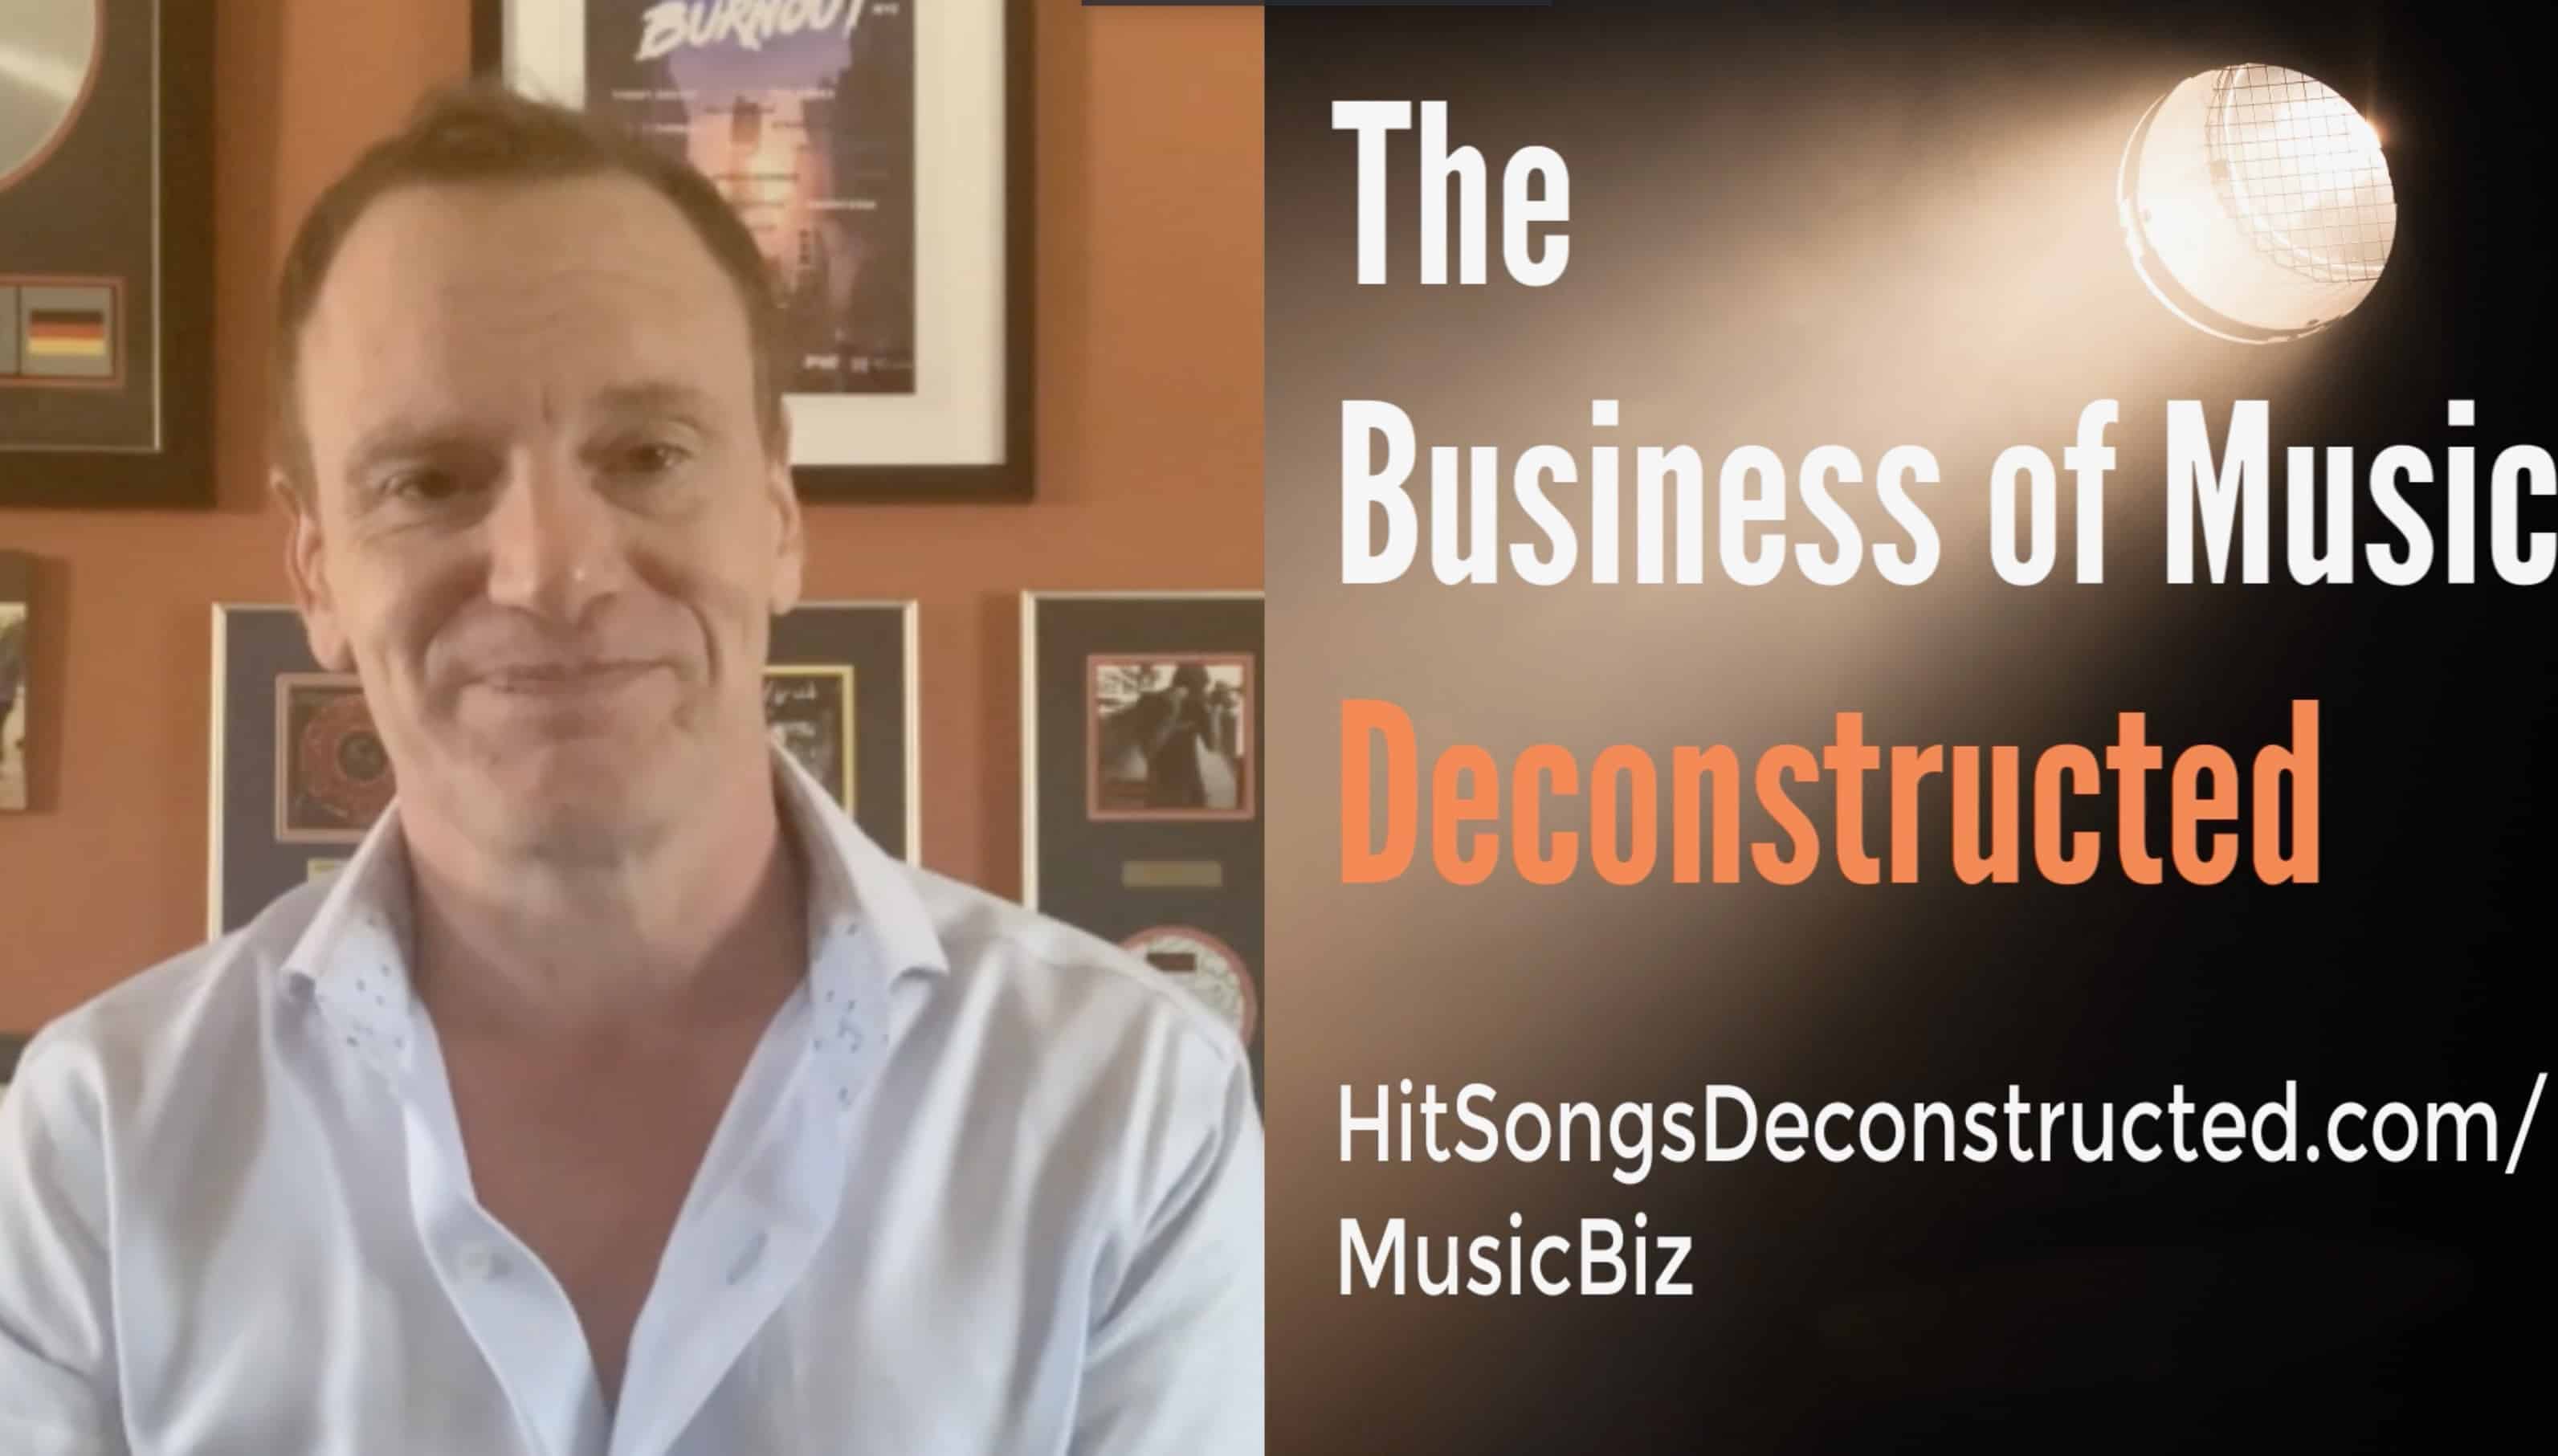 Industry Veteran Chad Richardson Hosts Free Seminar Tonight For His Upcoming Hit Songs Deconstructed Masterclass Series